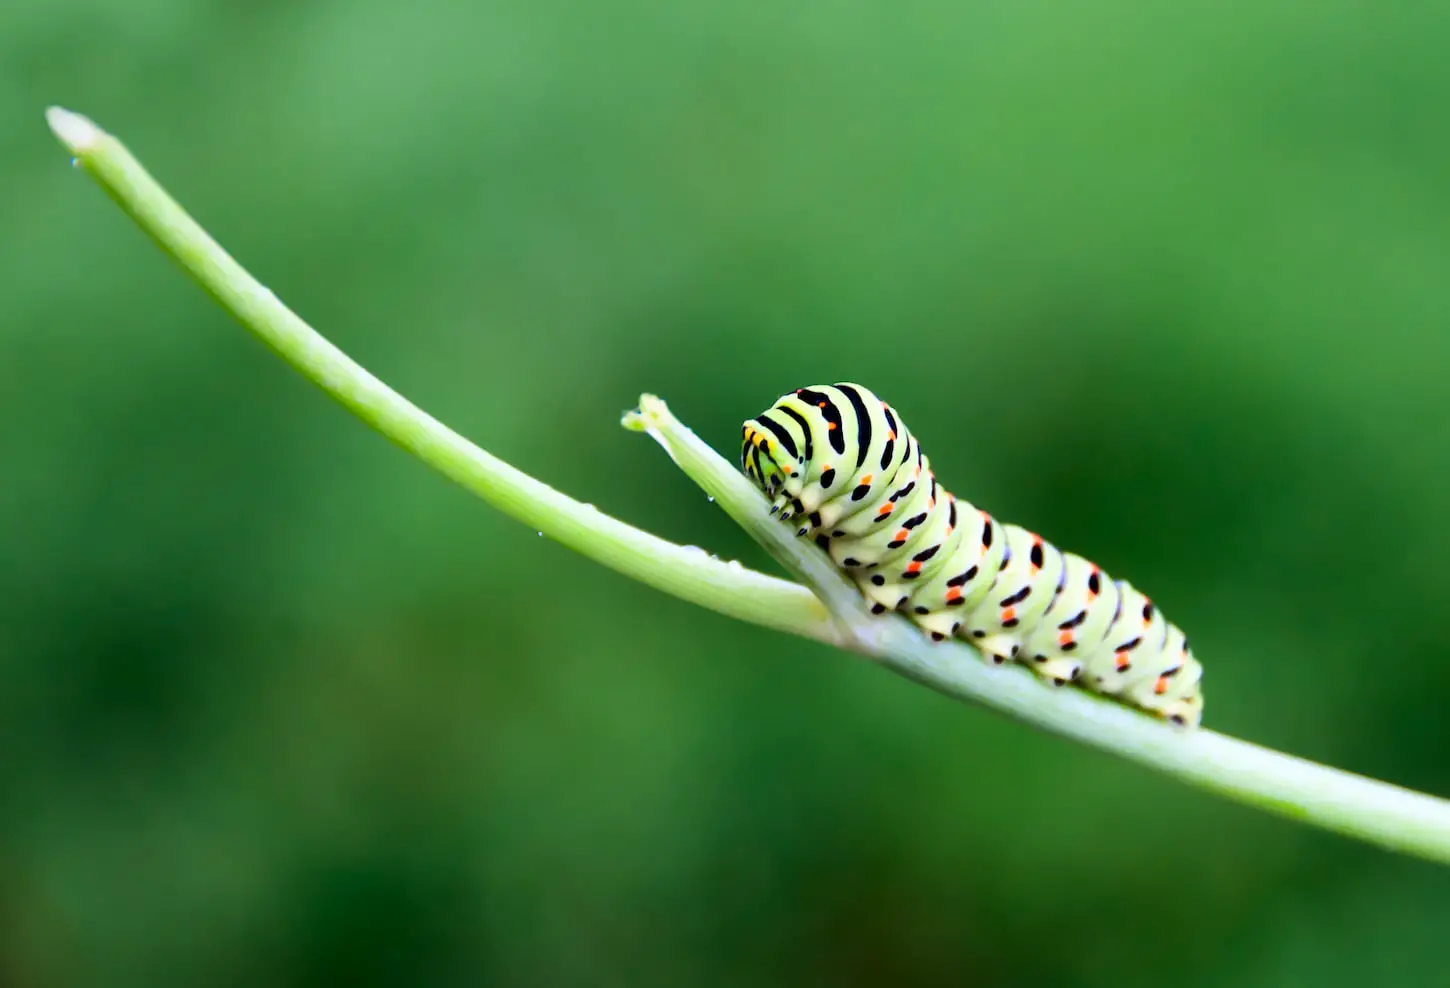 An image of a caterpillar on a branch.